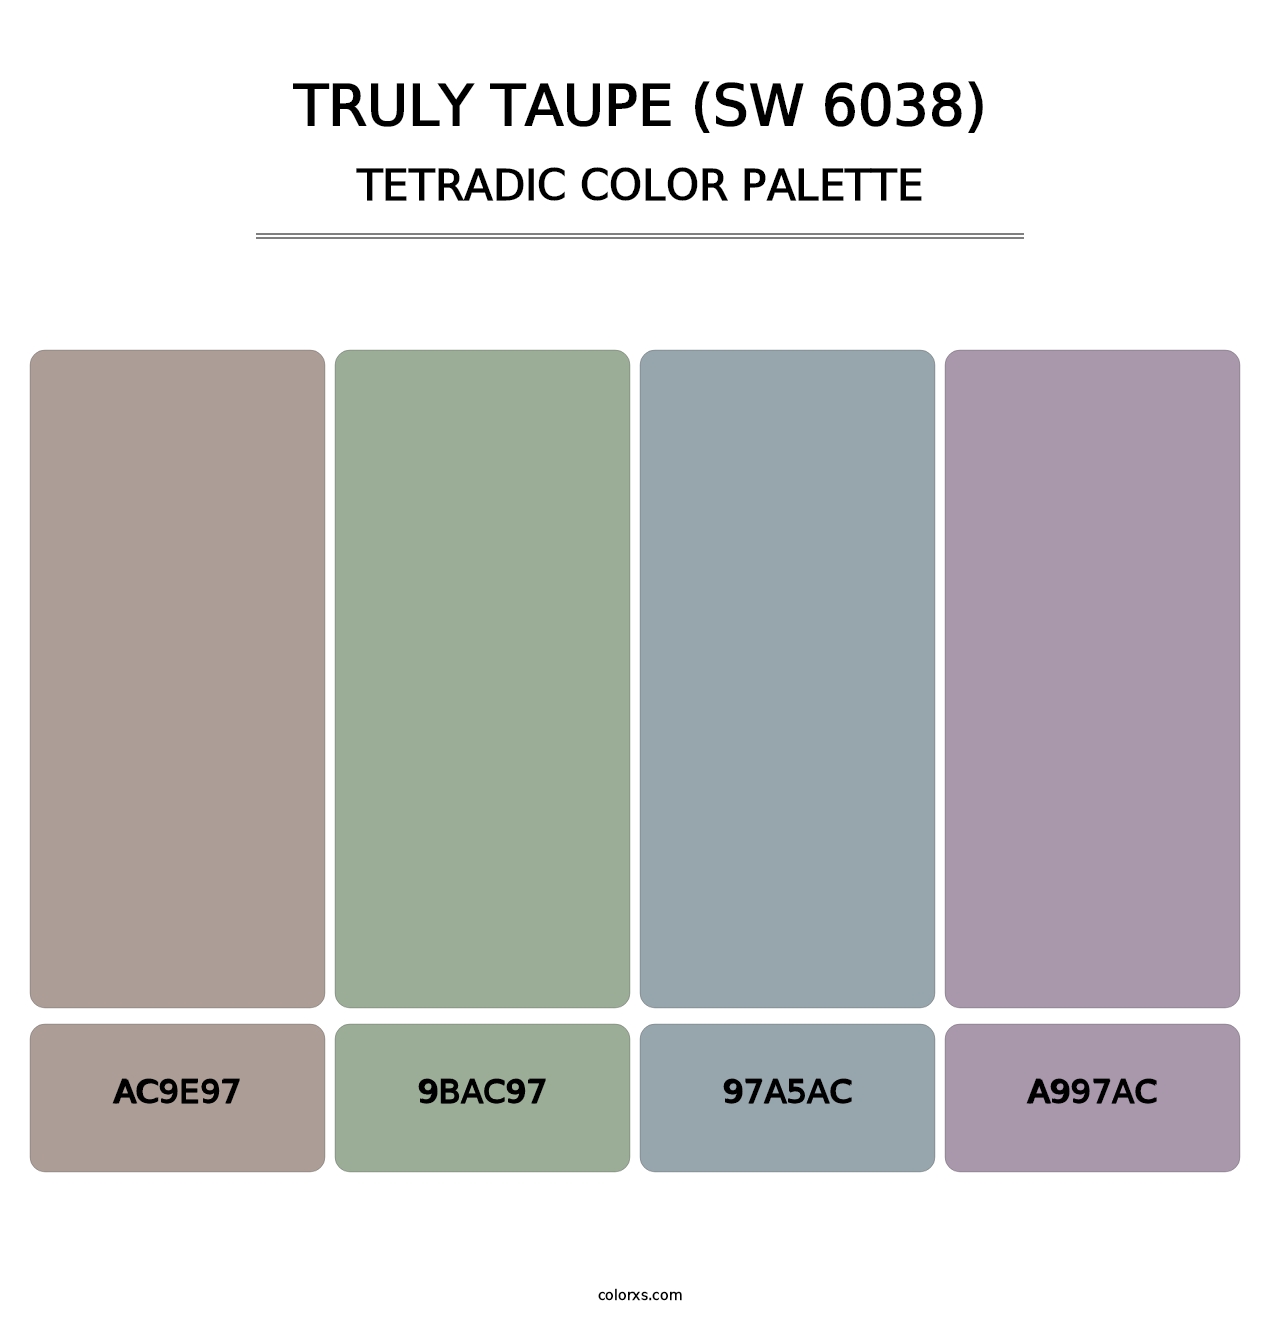 Truly Taupe (SW 6038) - Tetradic Color Palette